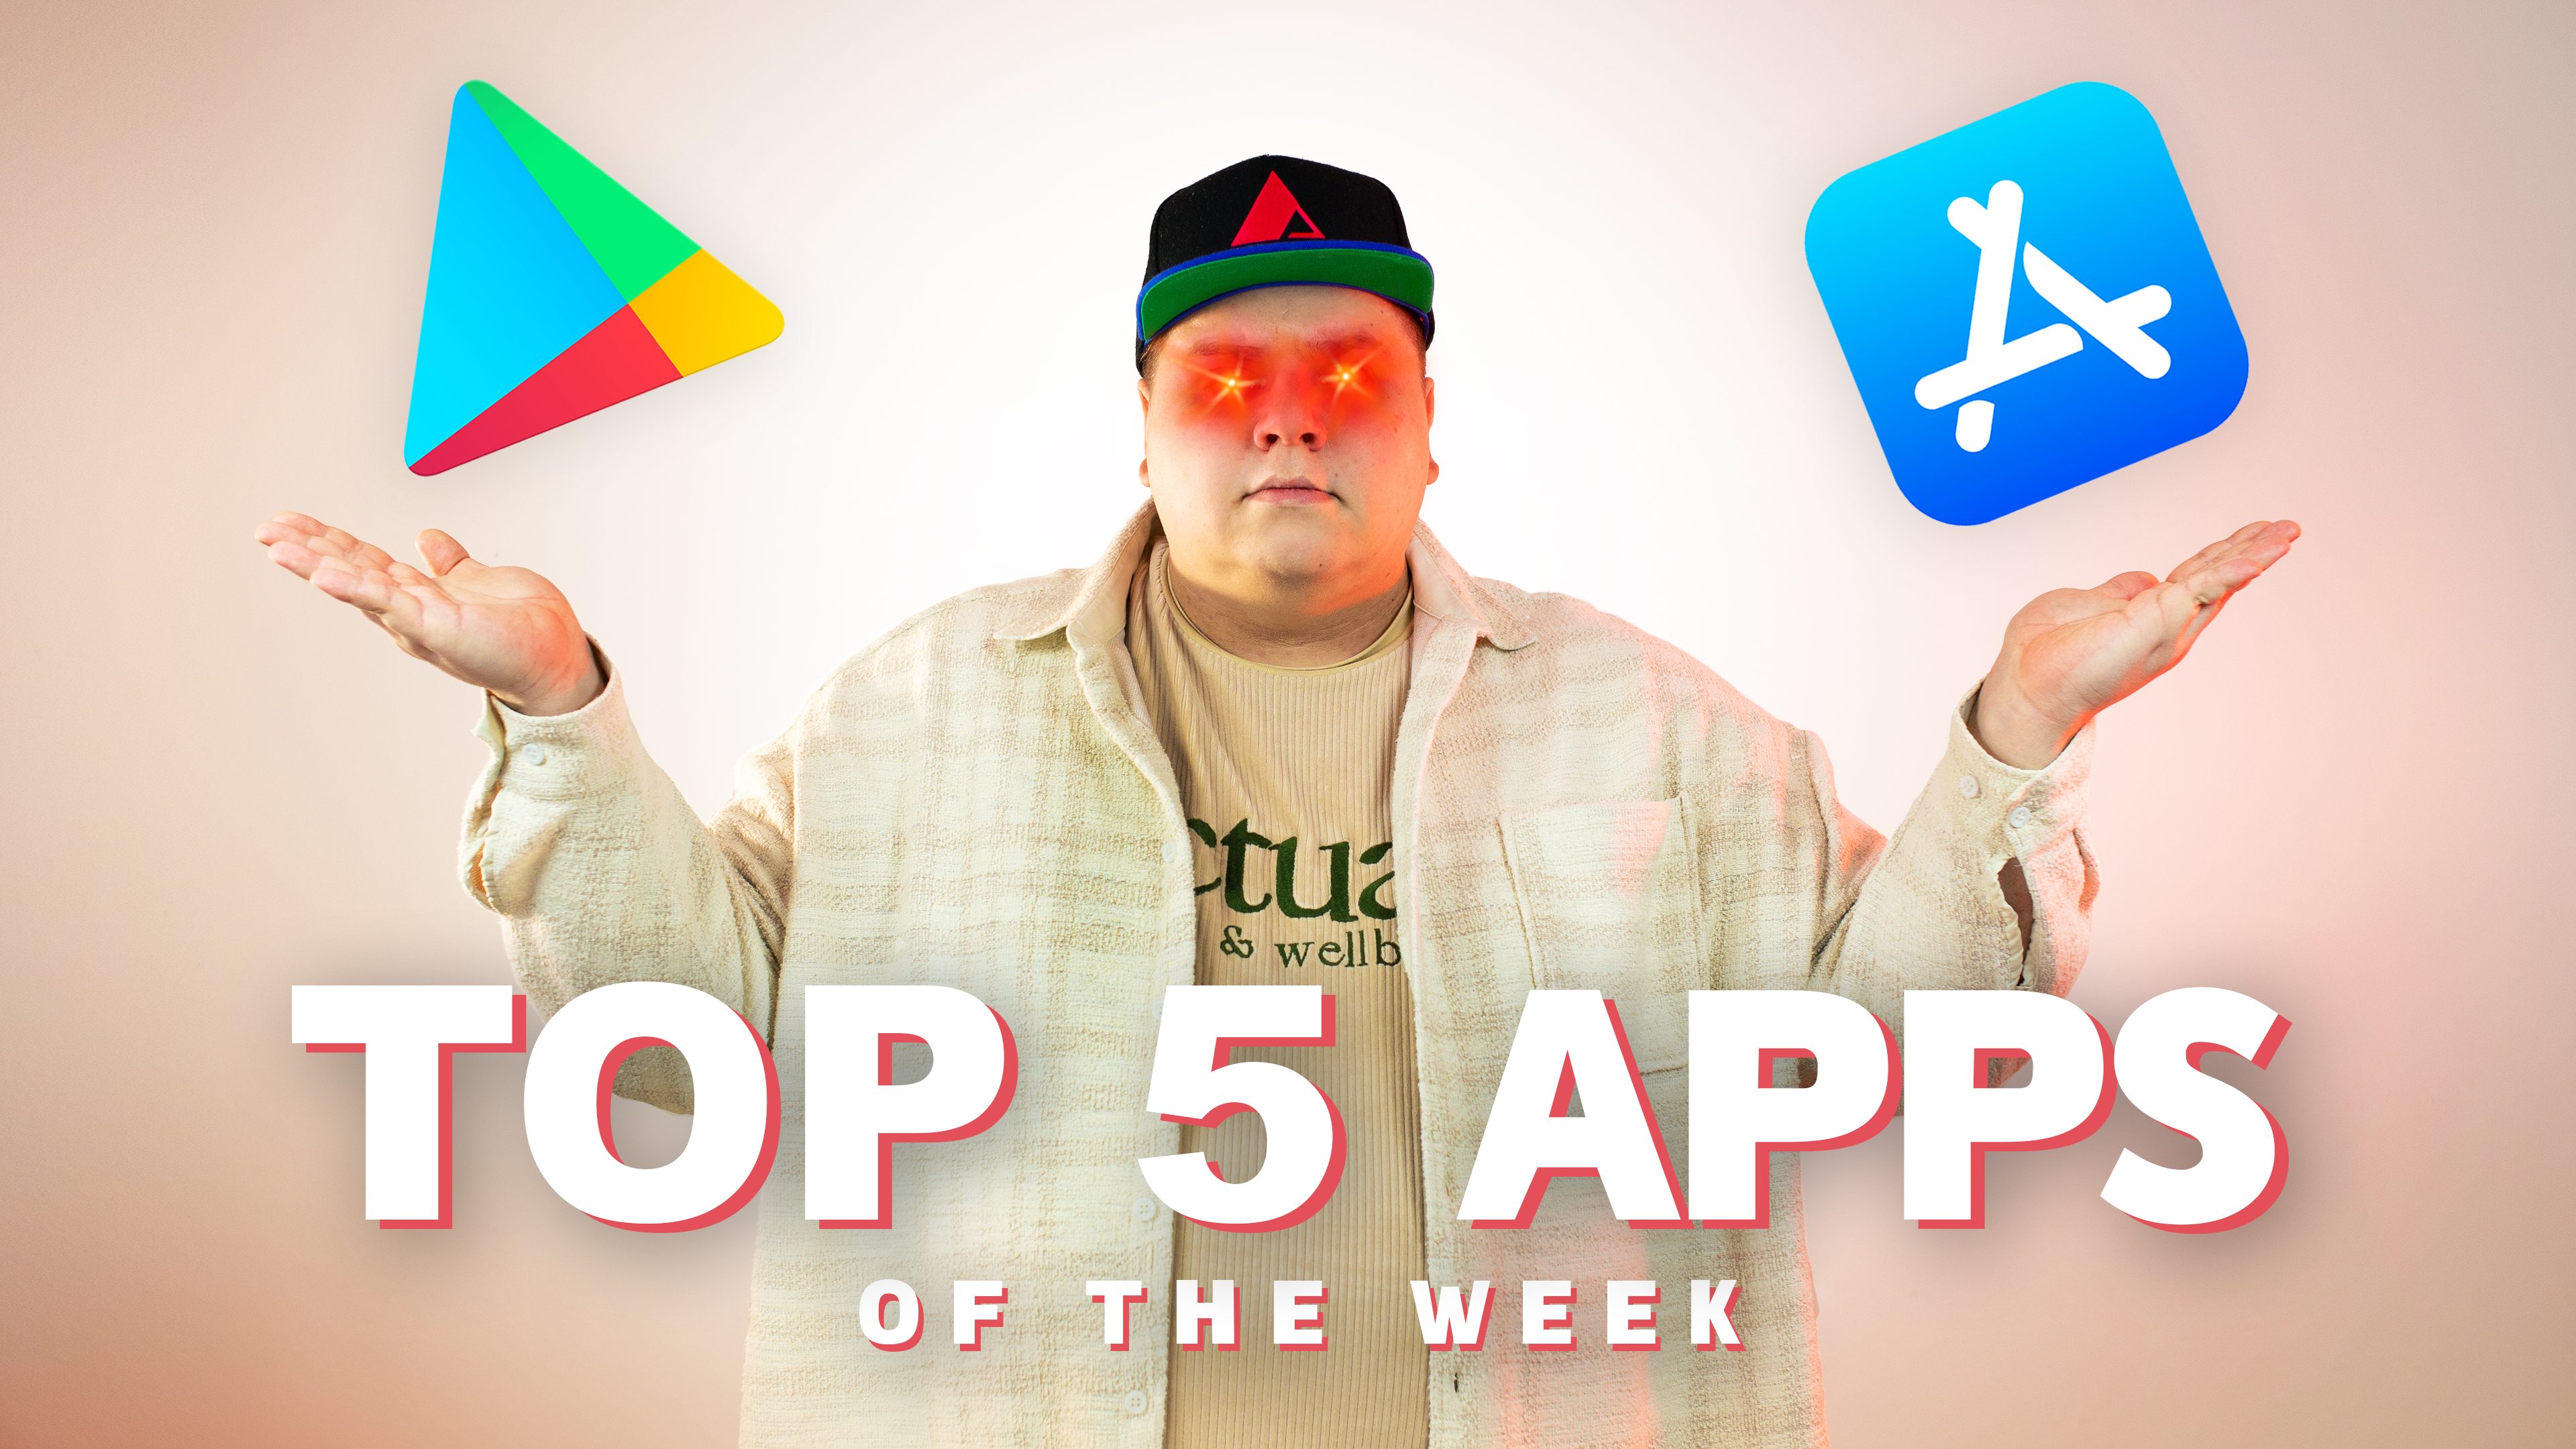 Top 5 apps of the week: Easter edition features mobile games and a travel app